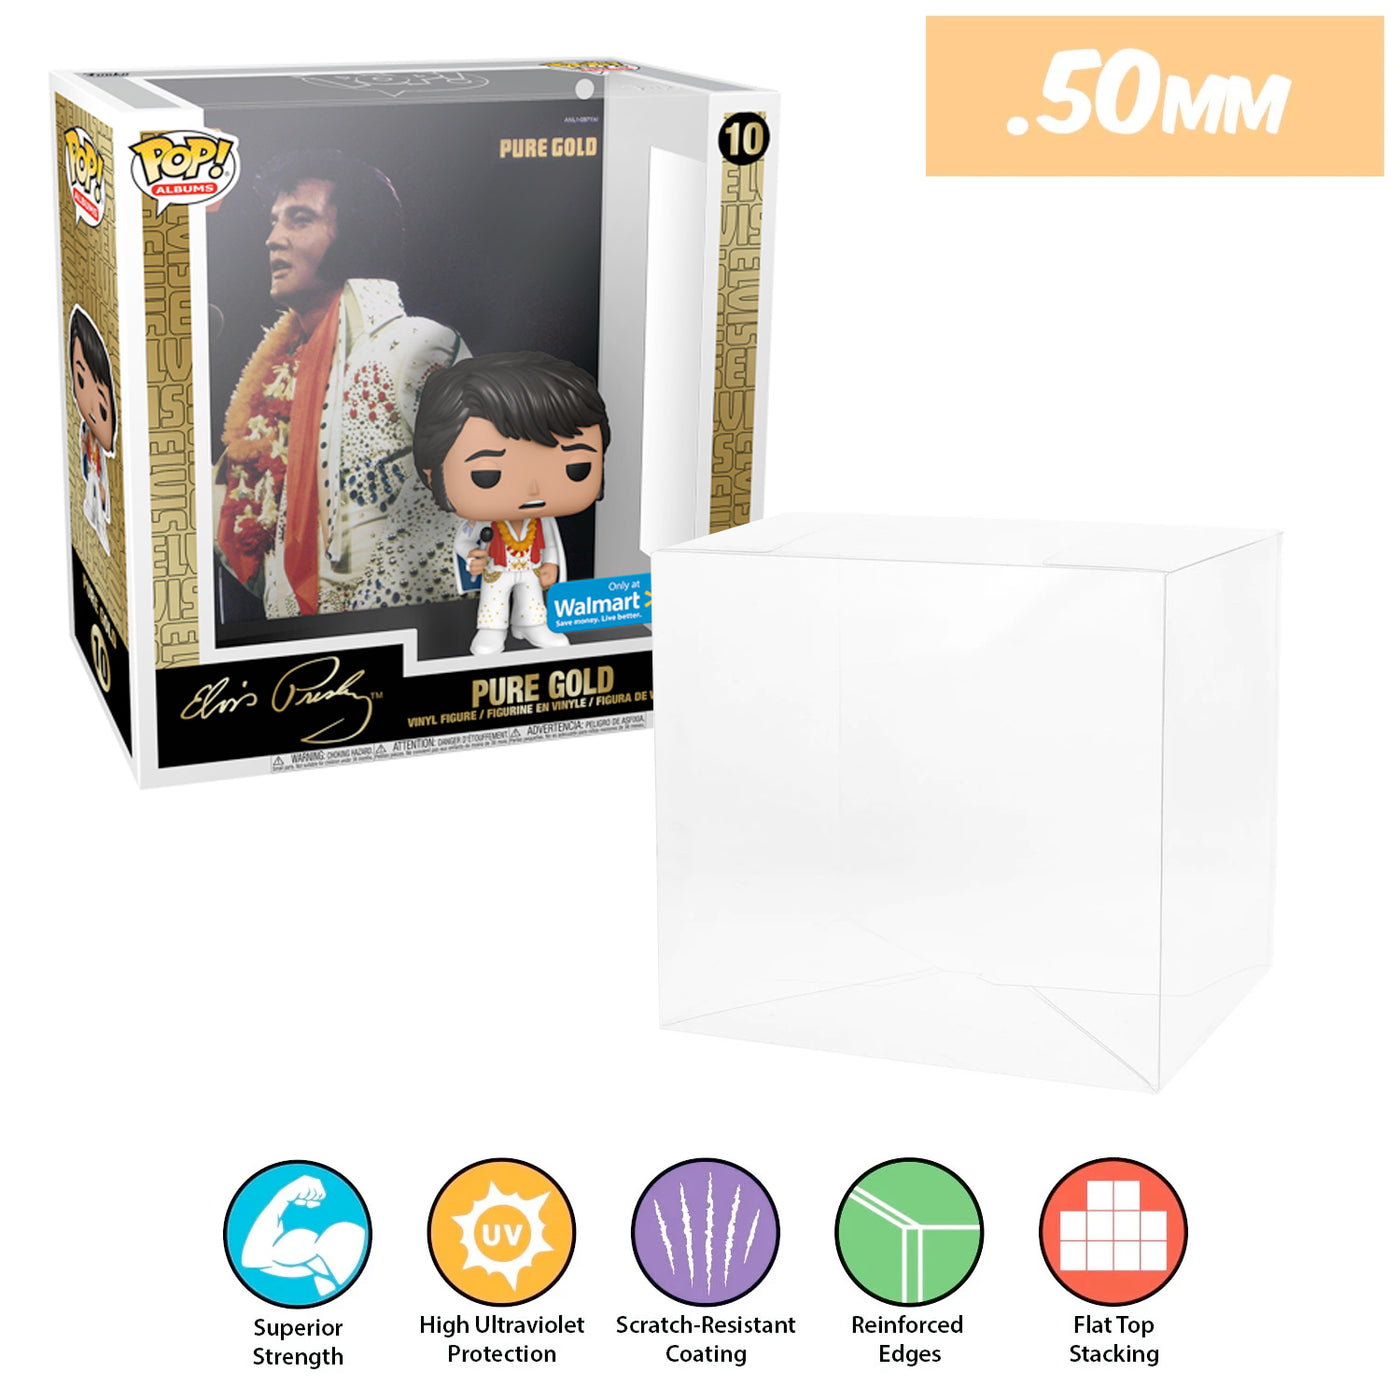 10 elvis pure gold pop albums best funko pop protectors thick strong uv scratch flat top stack vinyl display geek plastic shield vaulted eco armor fits collect protect display case kollector protector